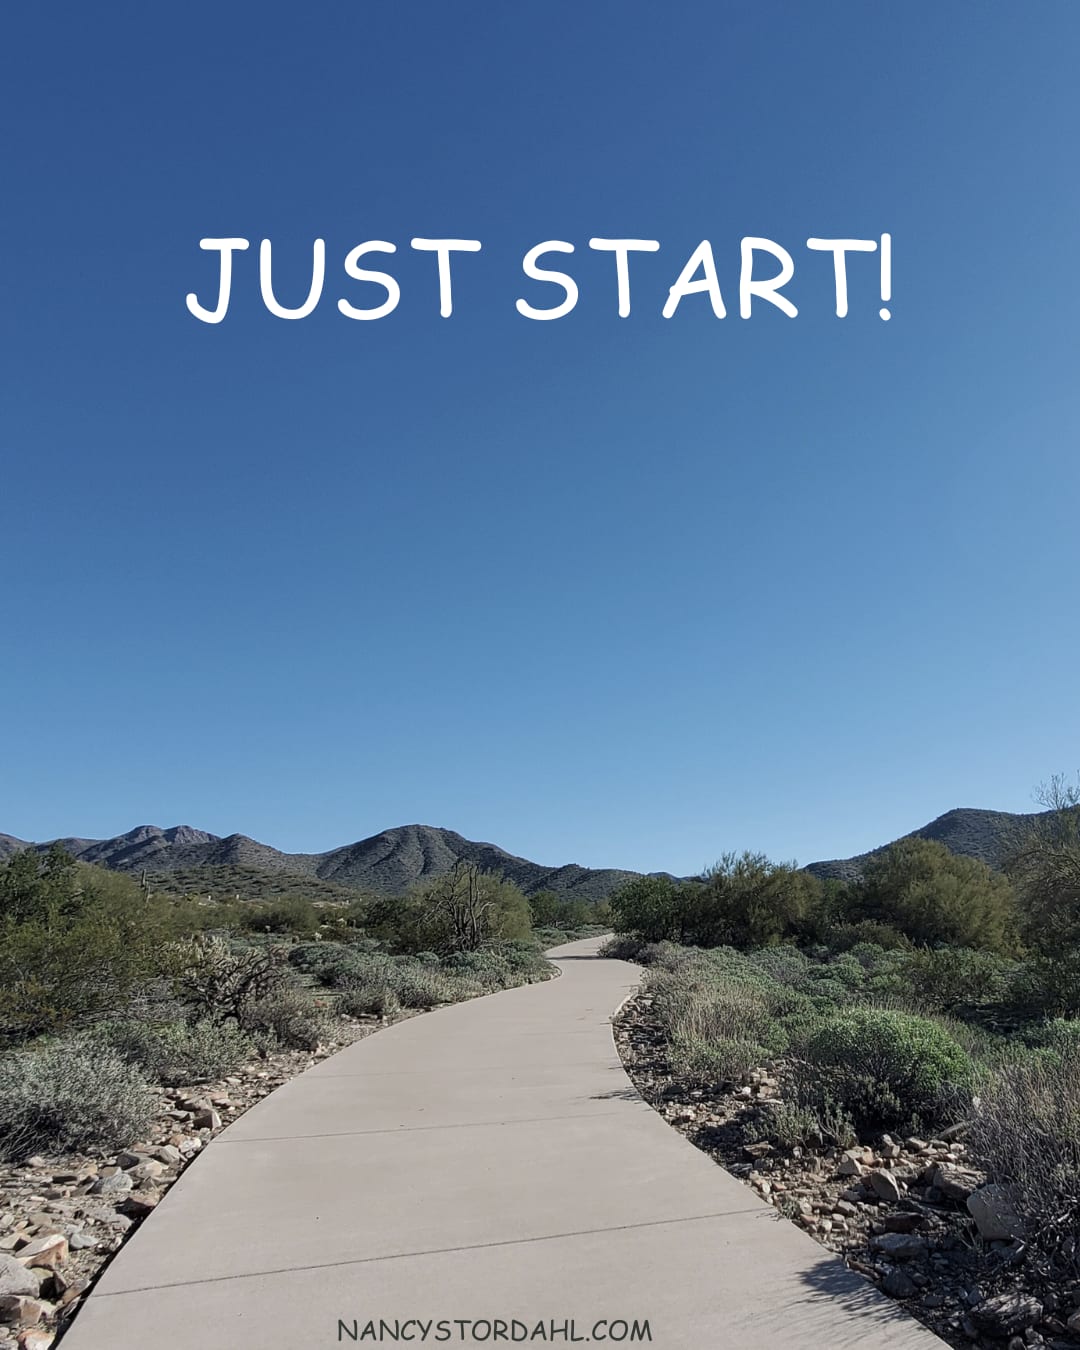 Go ahead and just start - even if it's hard or scary!